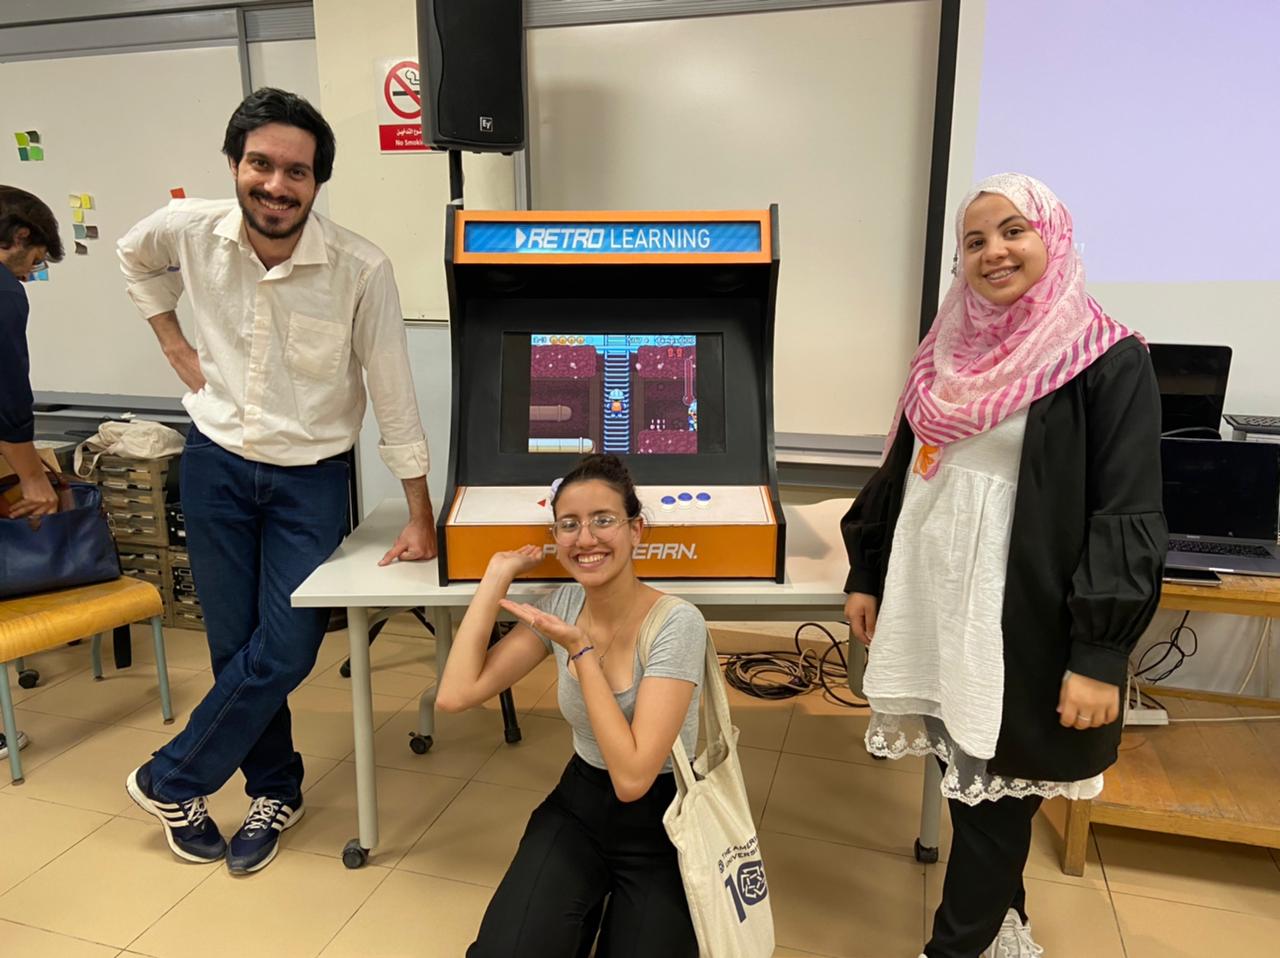 Mahmoudi and her team pose in front of the arcade machine